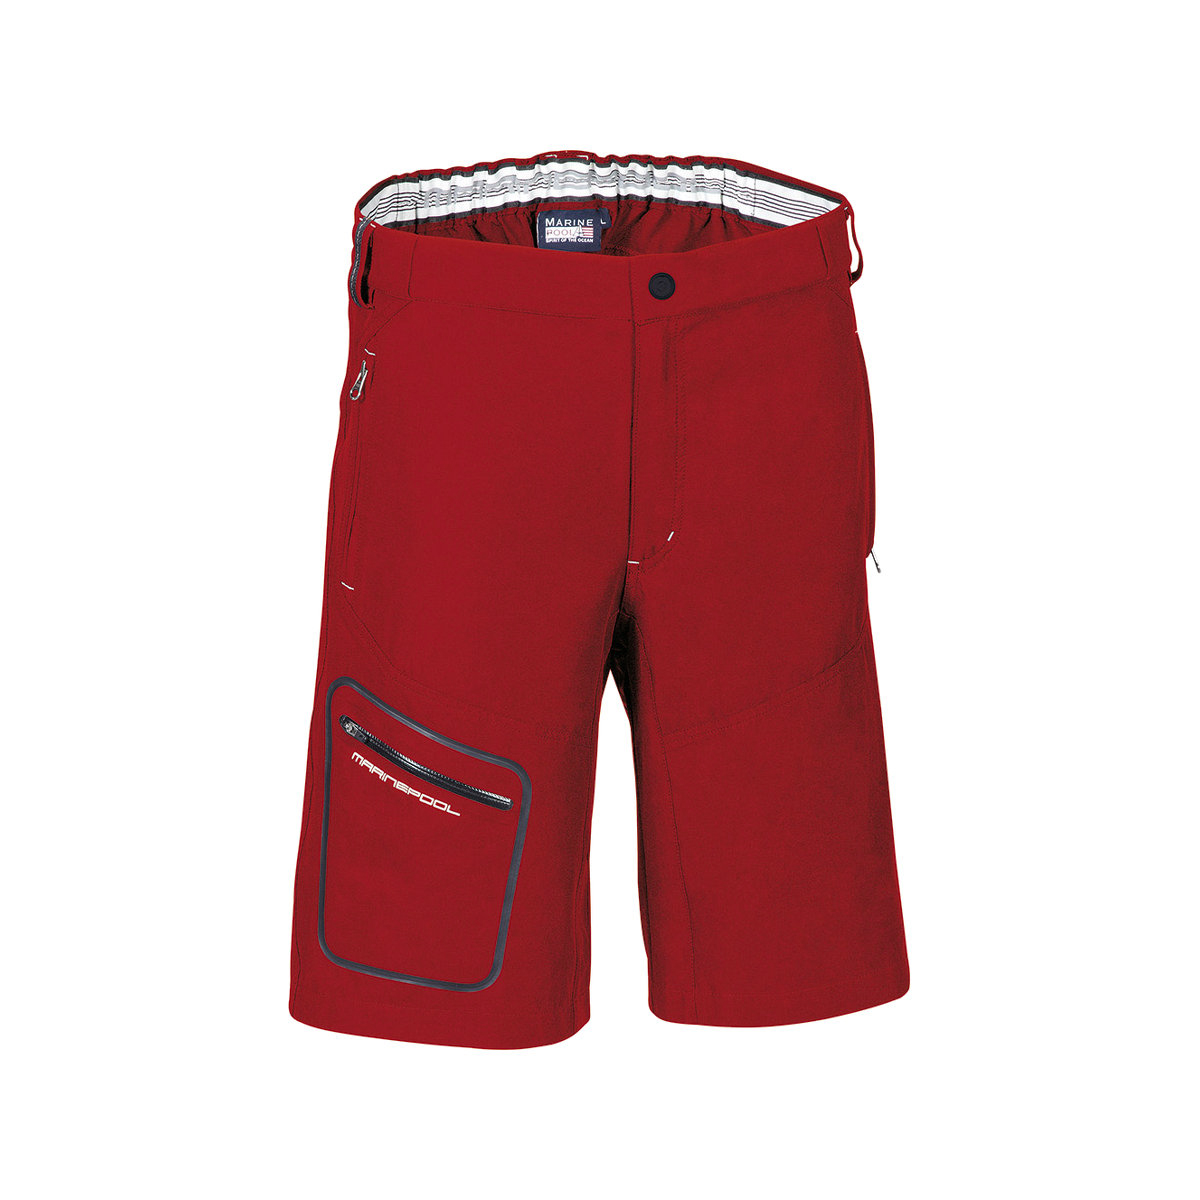 Marinepool Laser short de voile, homme - rouge, taille XS